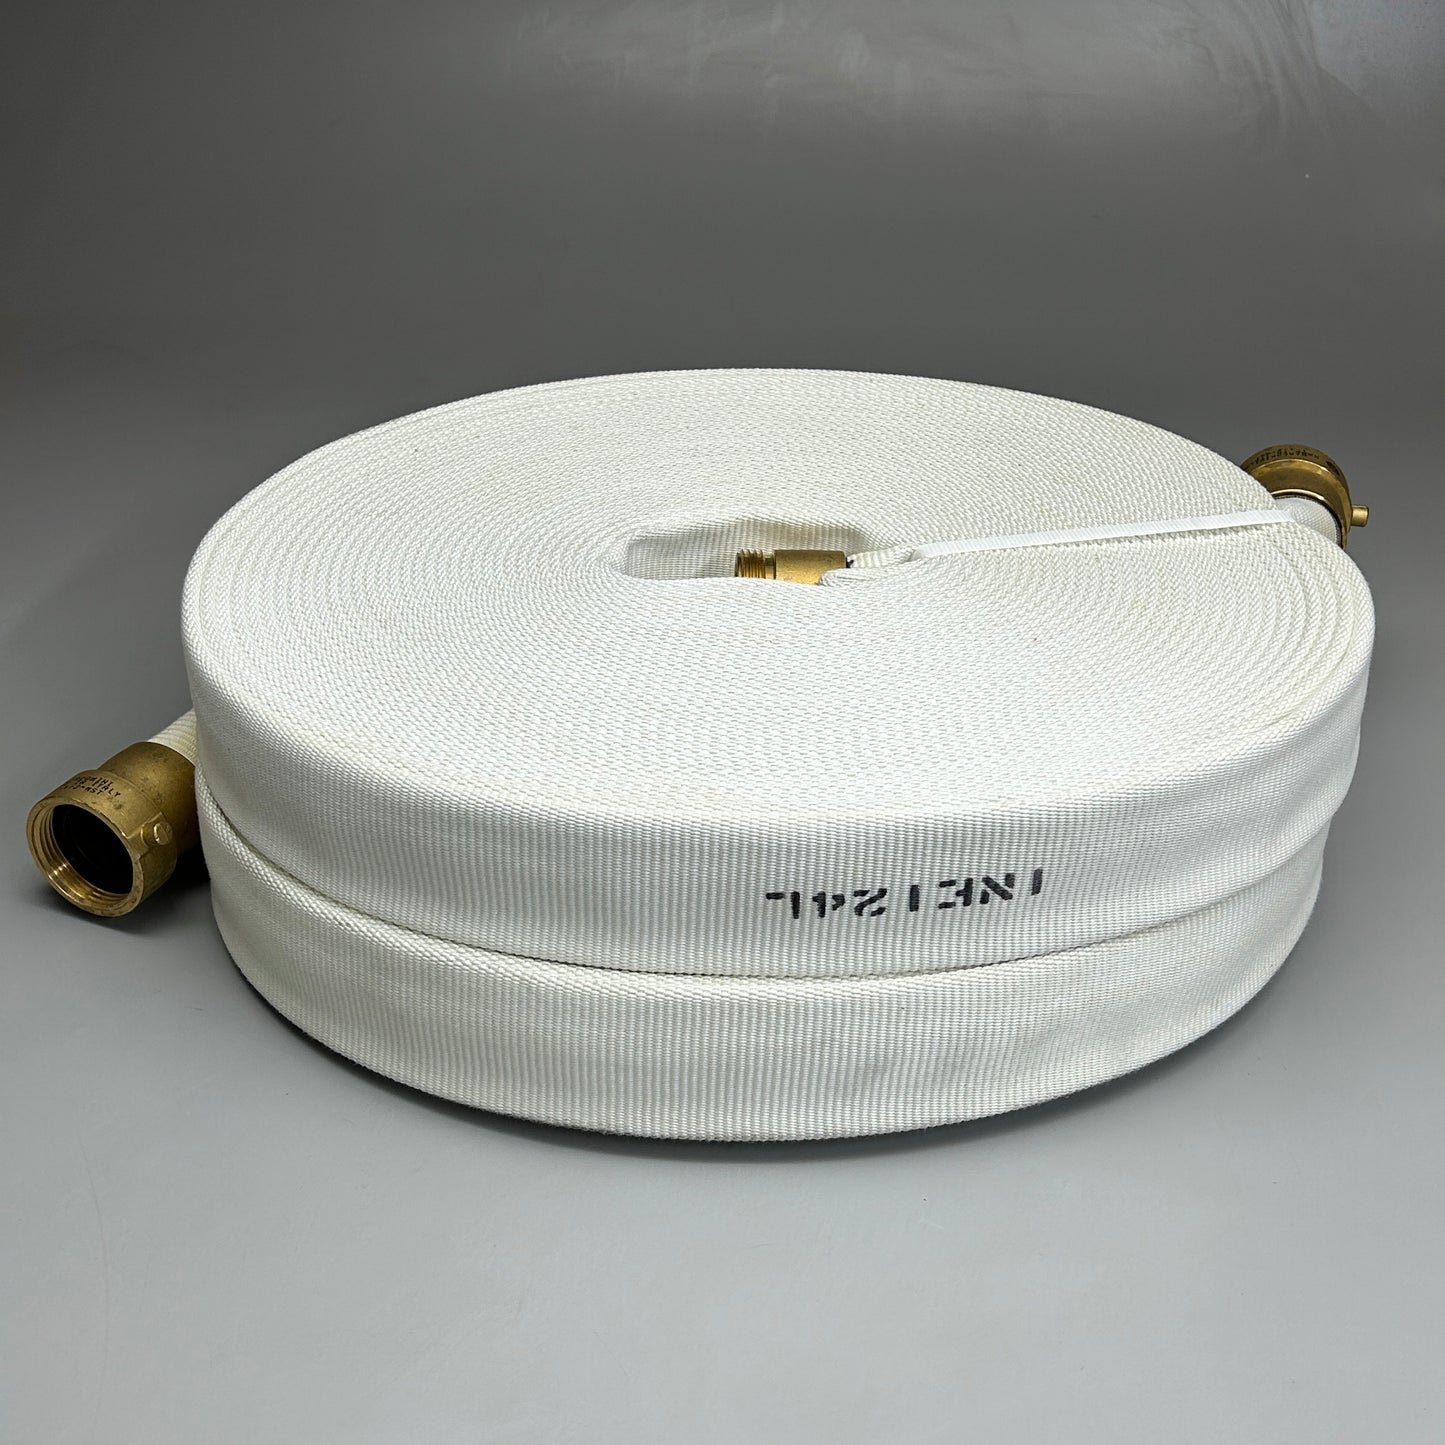 NAFH 2-PACK! White 1 1/2" x 100' Double Jacket Industrial Hose (New)